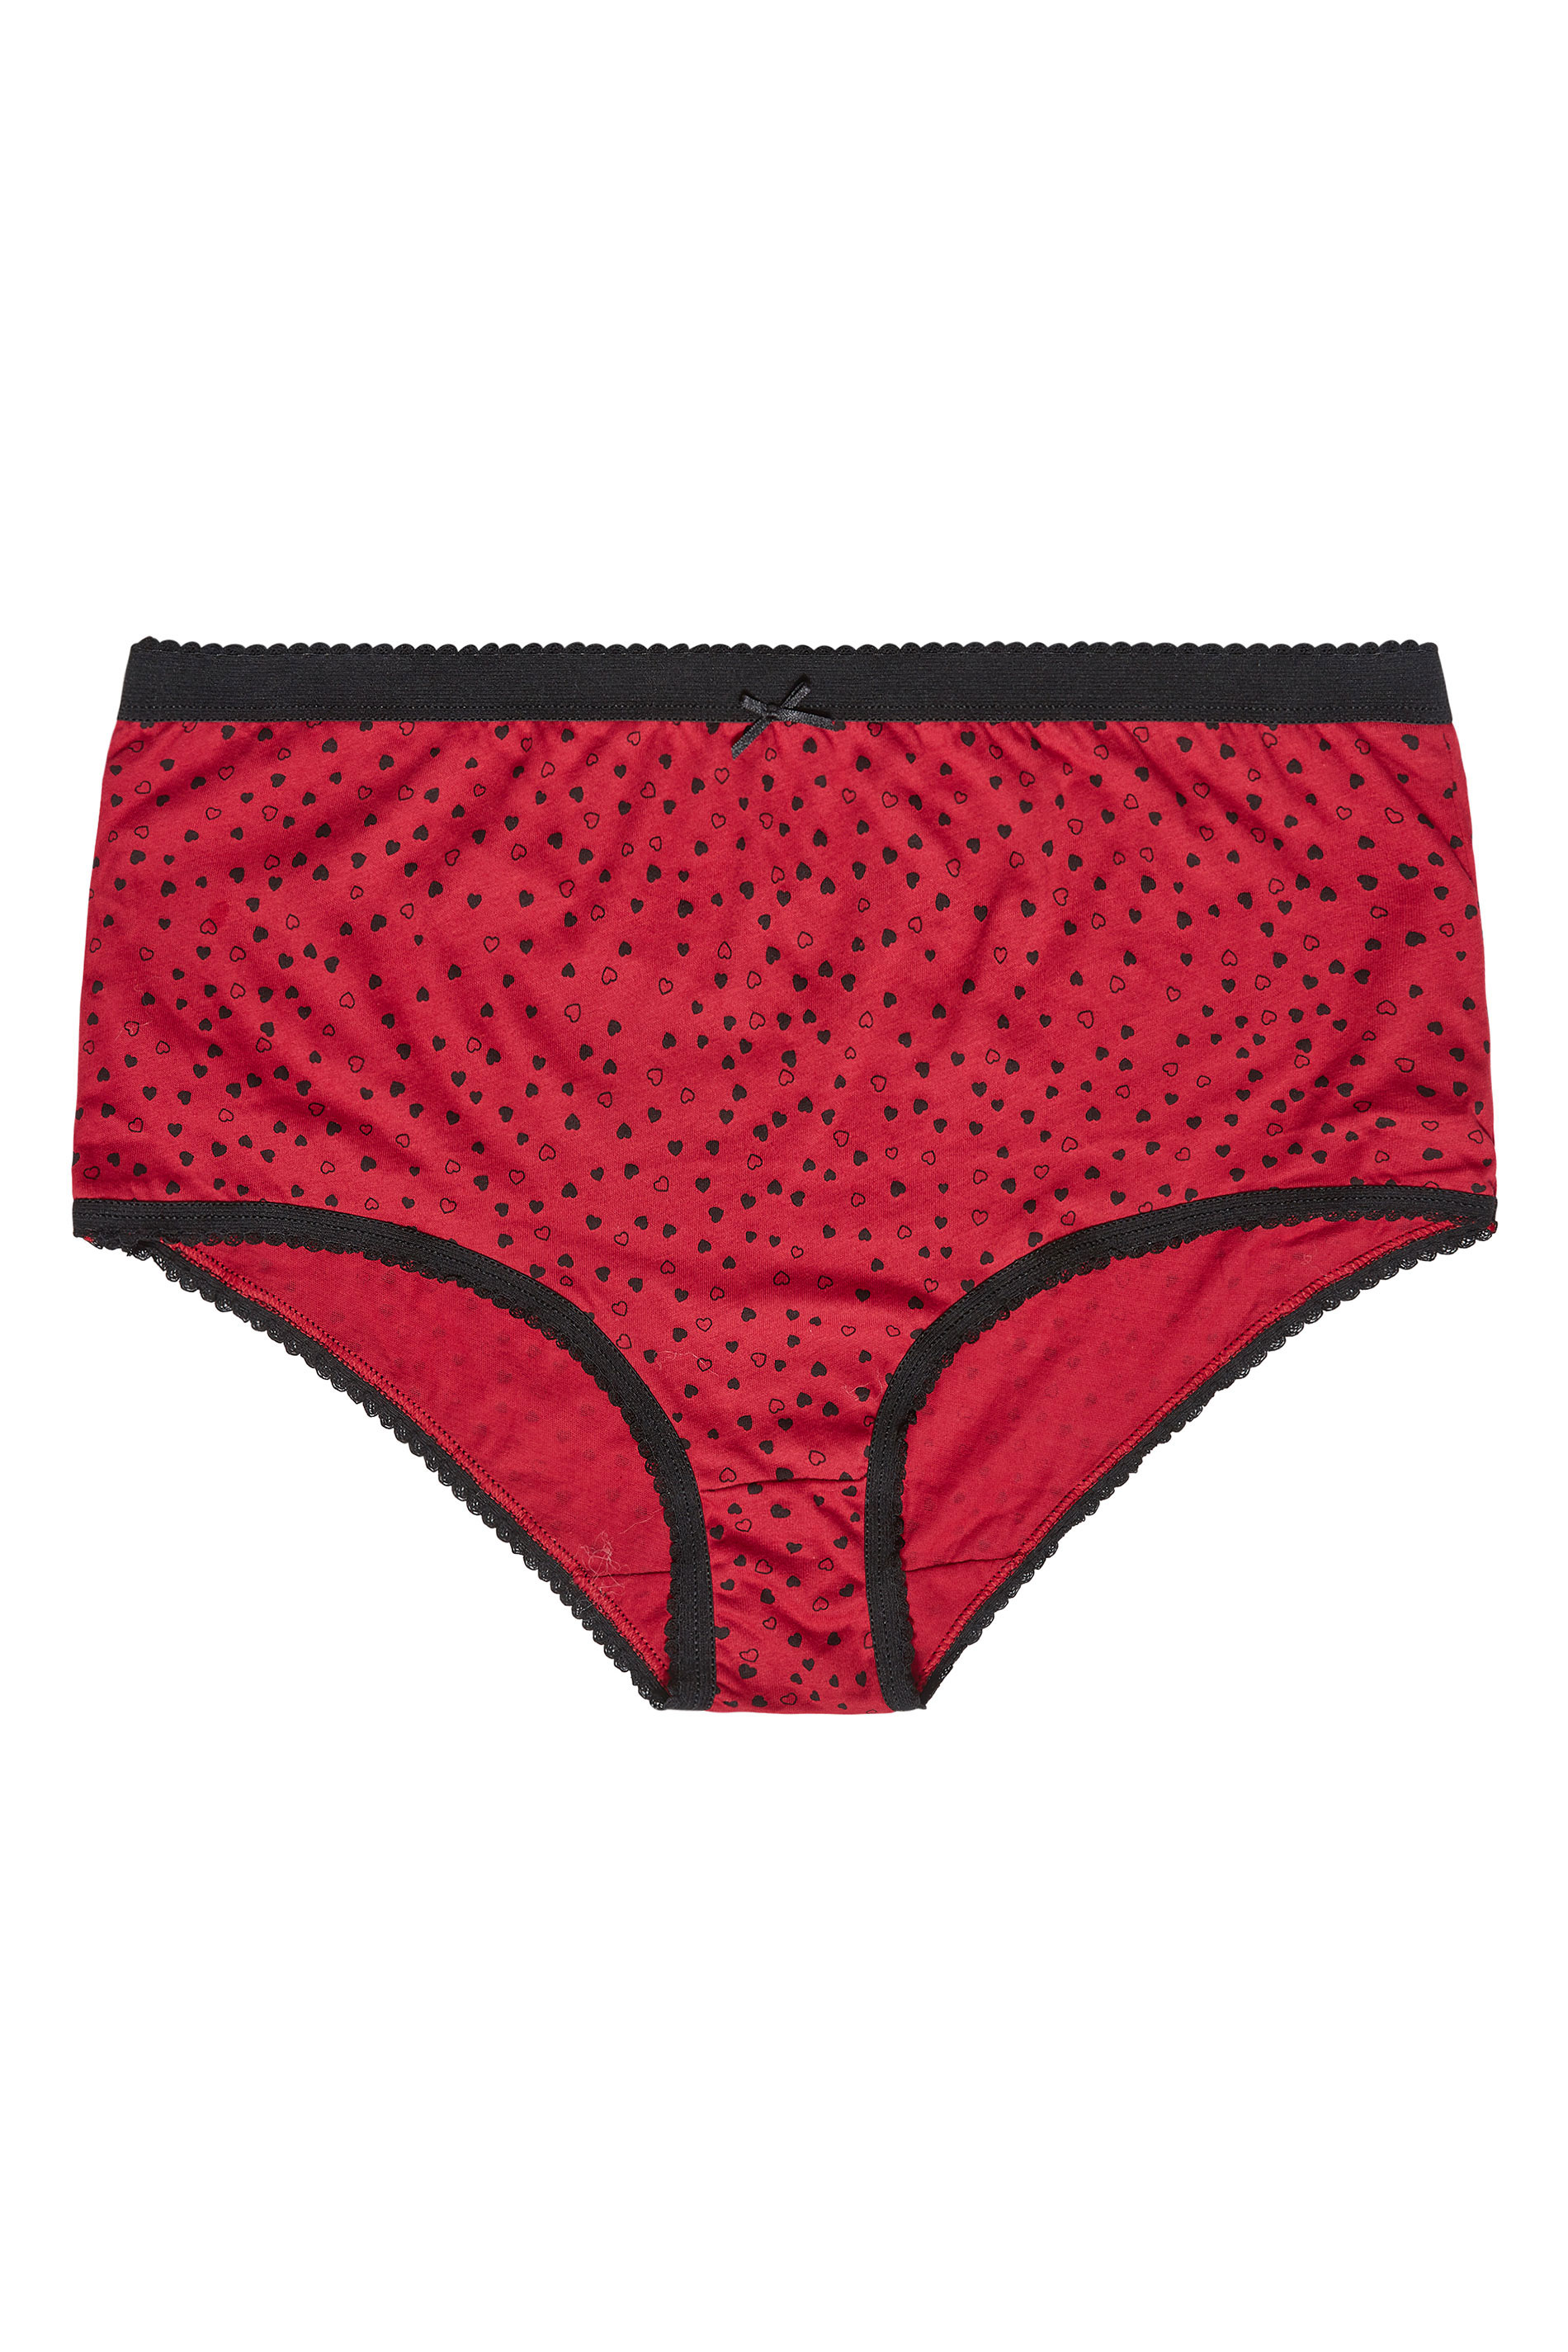 5 PACK Red & Black Heart Print Full Briefs | Yours Clothing